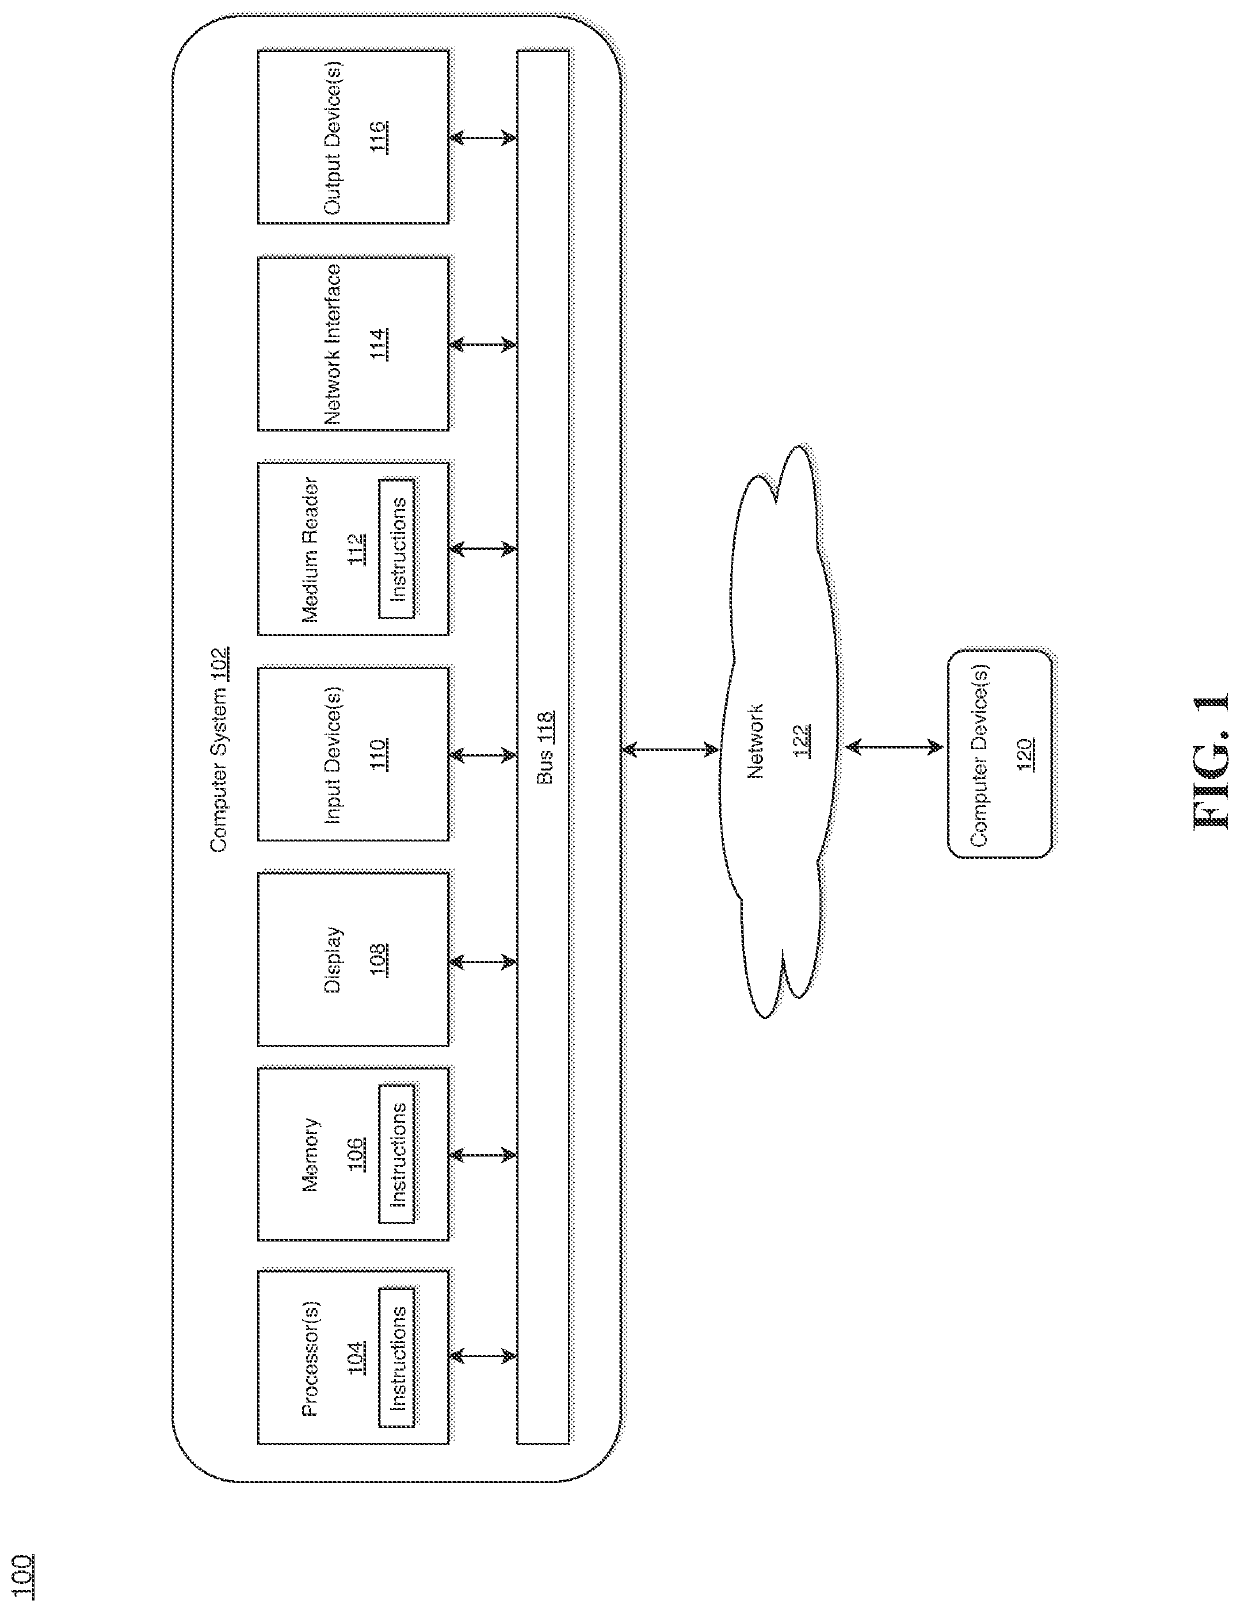 System and method for automatically generating executable tests in gherkin format